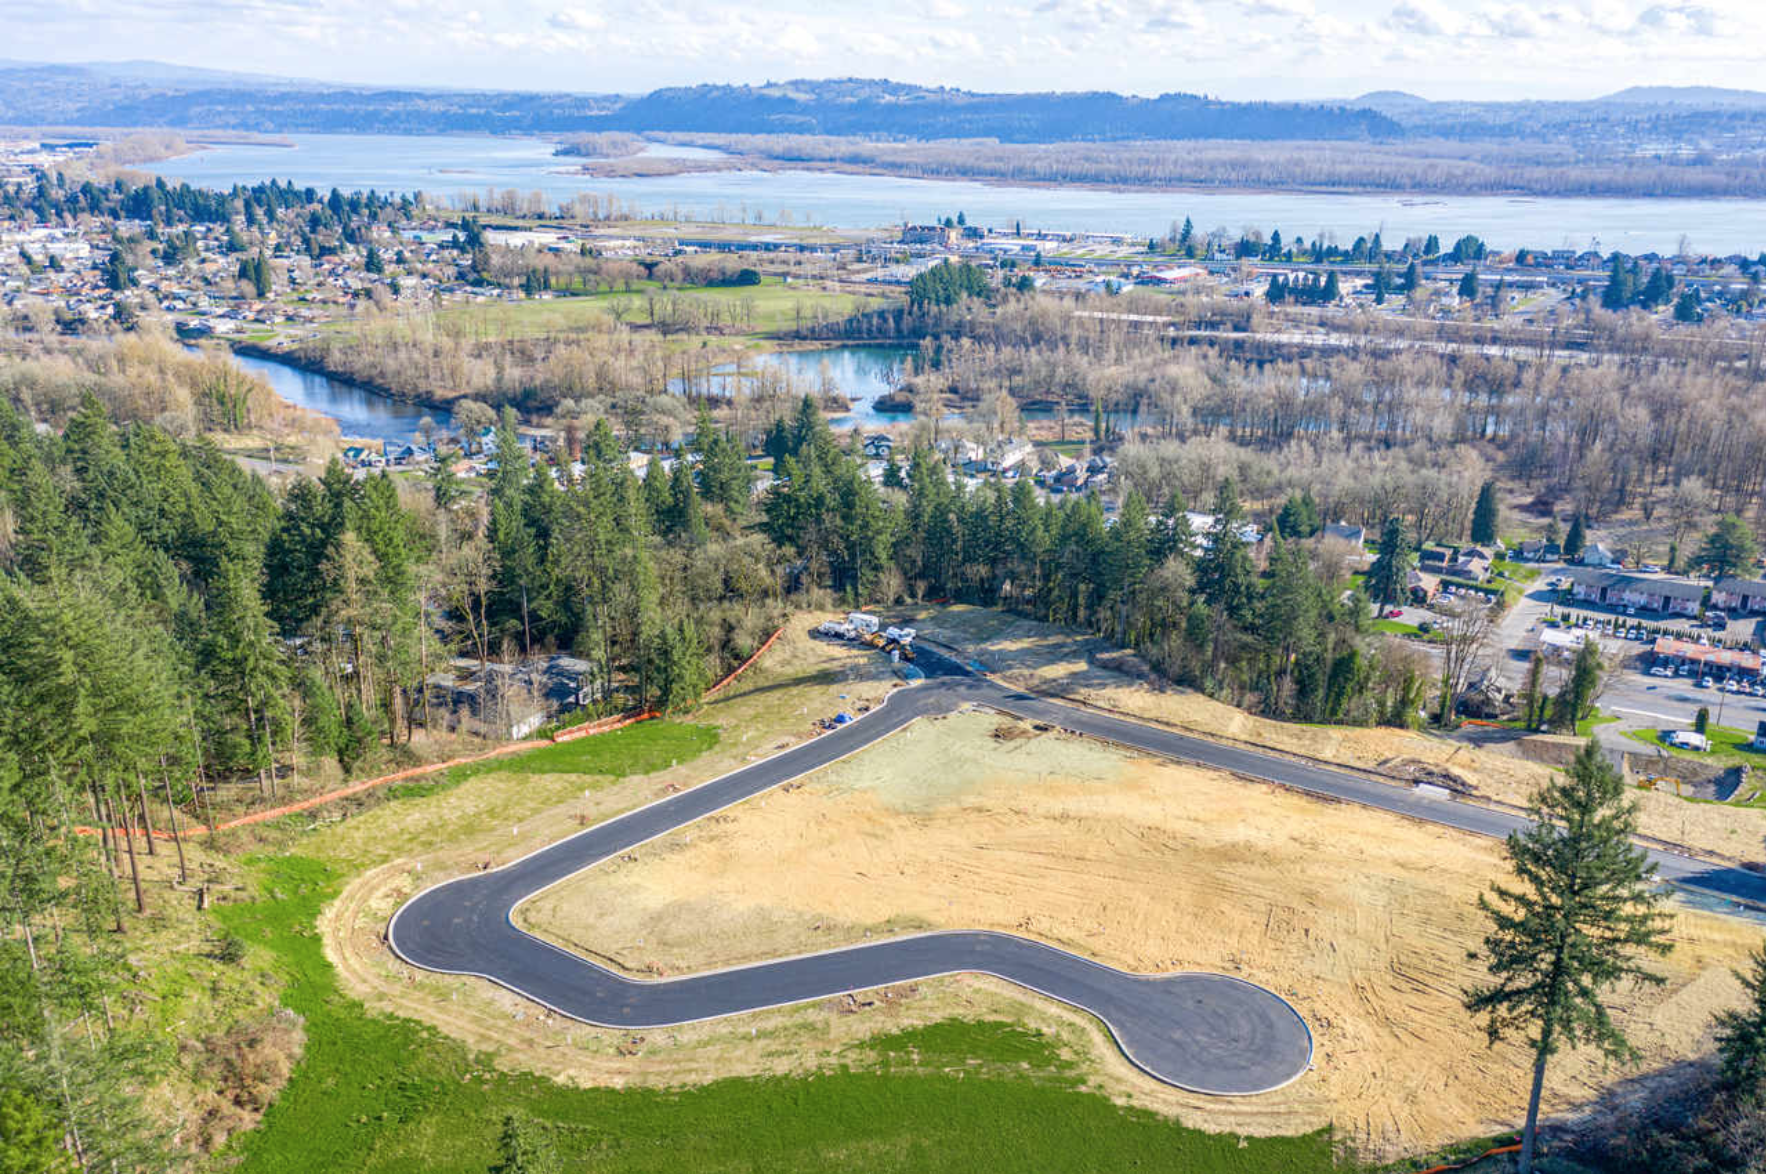 Sold! Two lots side by side in Camas!